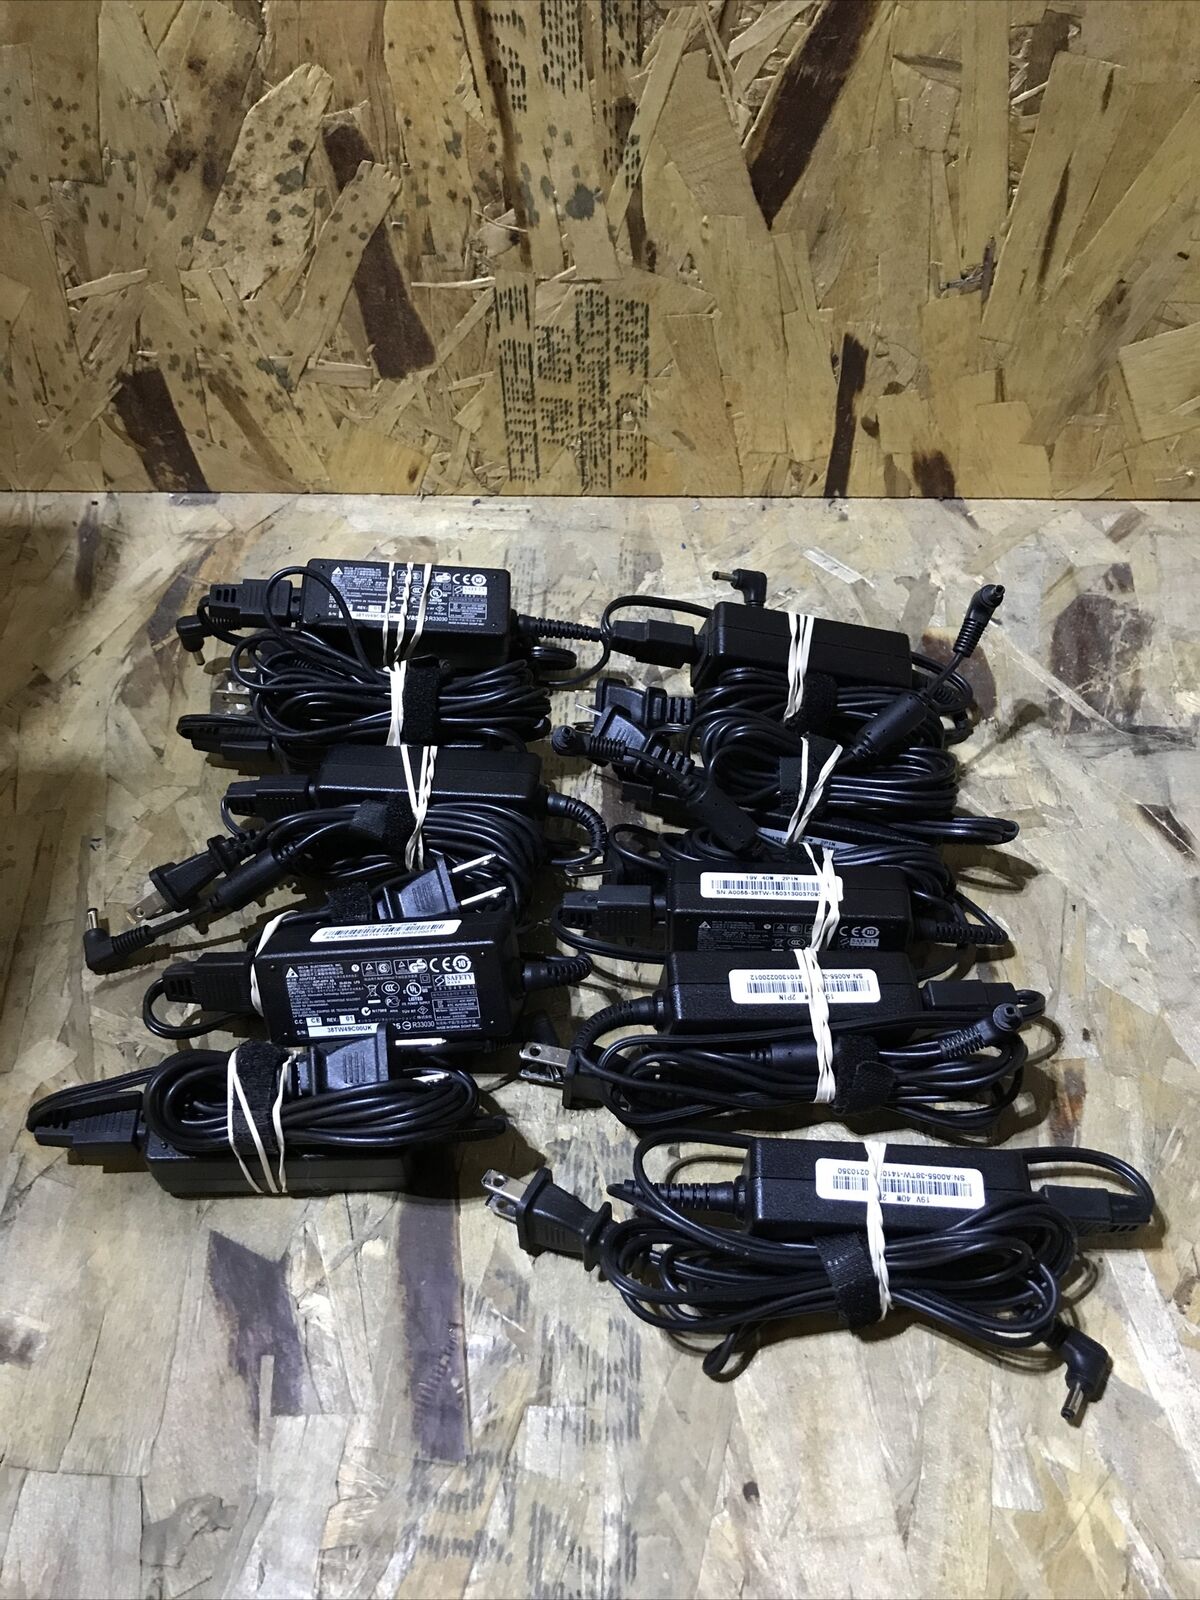 LOT OF10 Delta Electronics Power Adapter 19V 40W 2 PIN ADP-40PH AB OEM